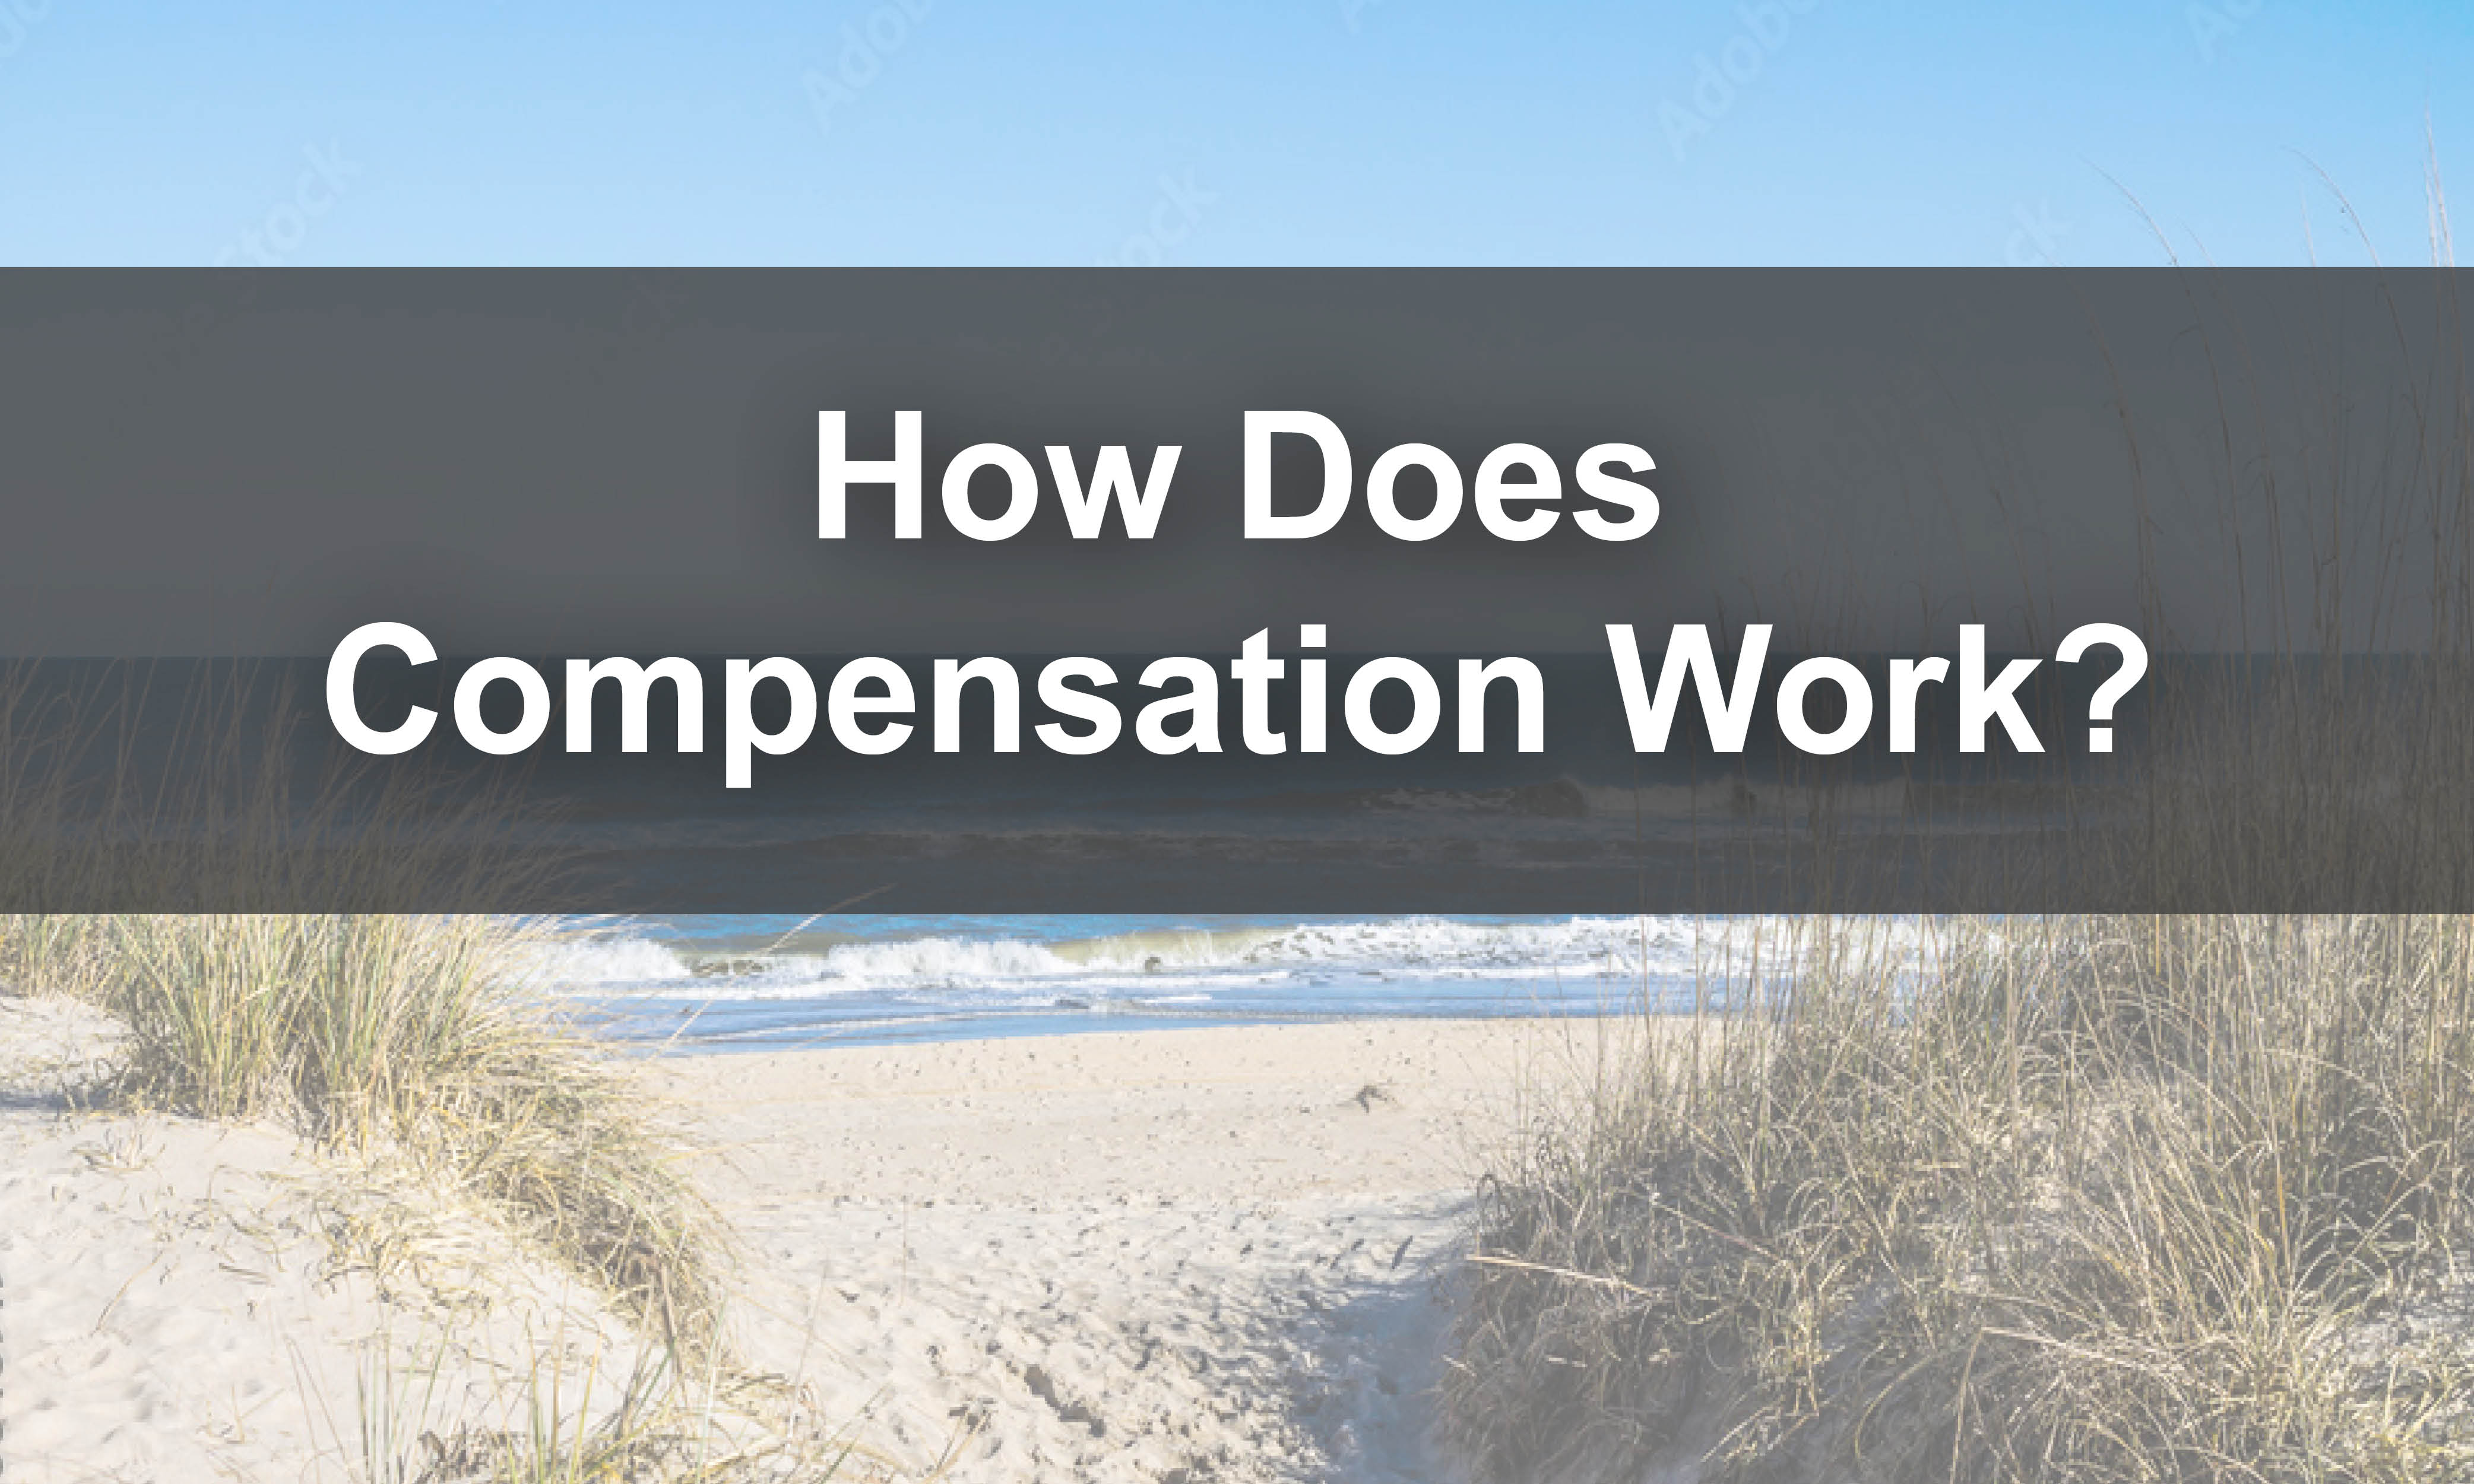 Link to explanation of compensation